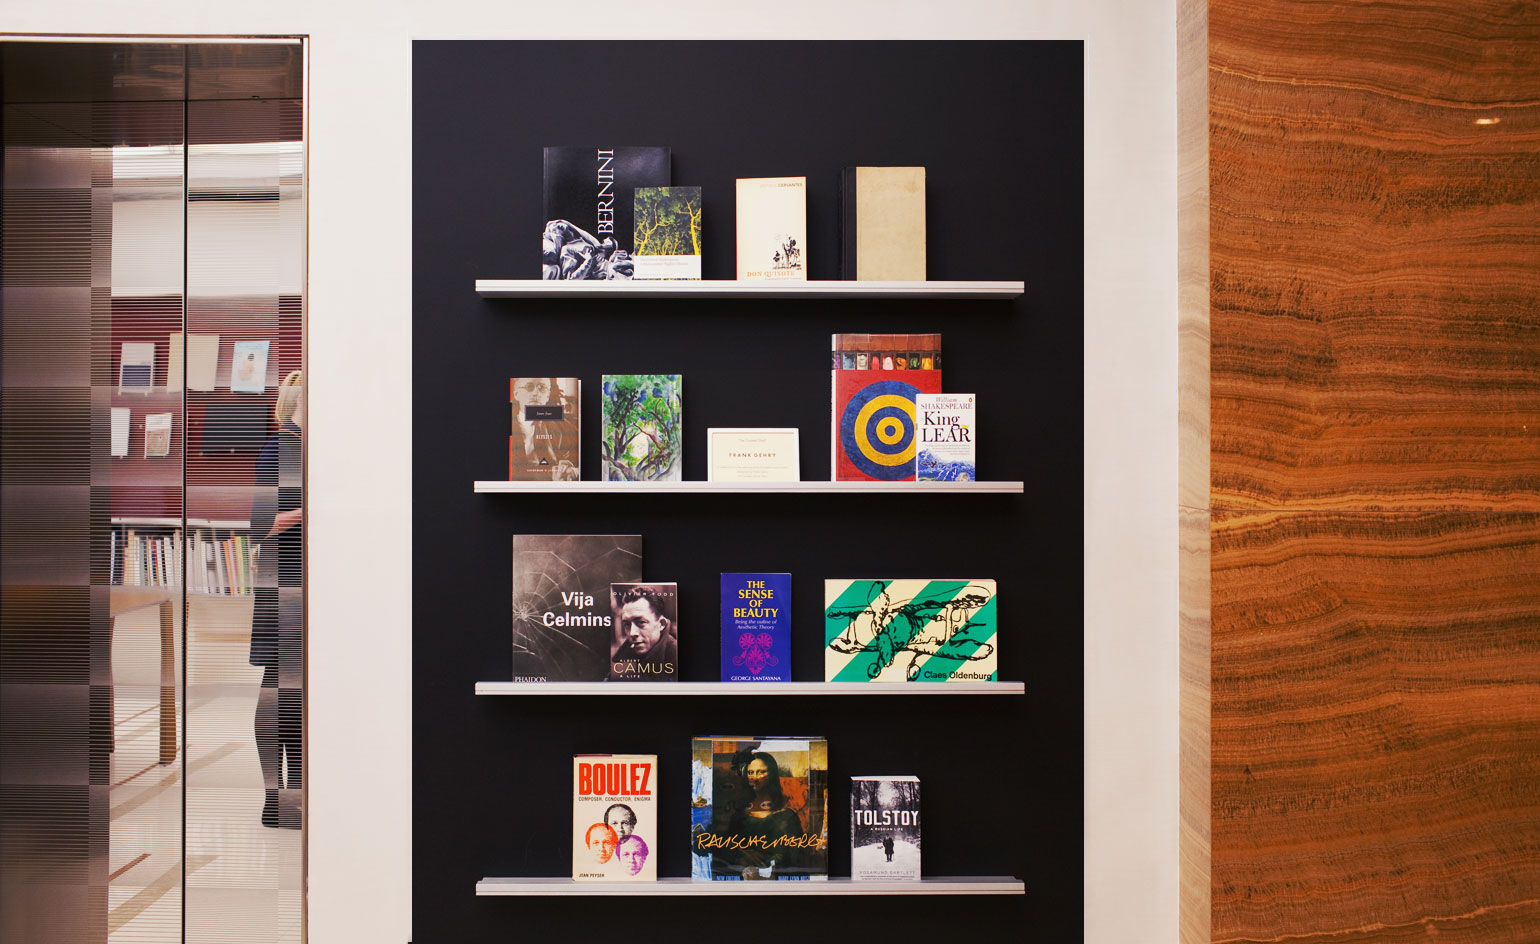 Frank Gehry has selected personal favorites for his 'Curated Bookshelf' at Louis Vuitton's London flagship. The shelf is located in the first-floor <i>librarie</i>.